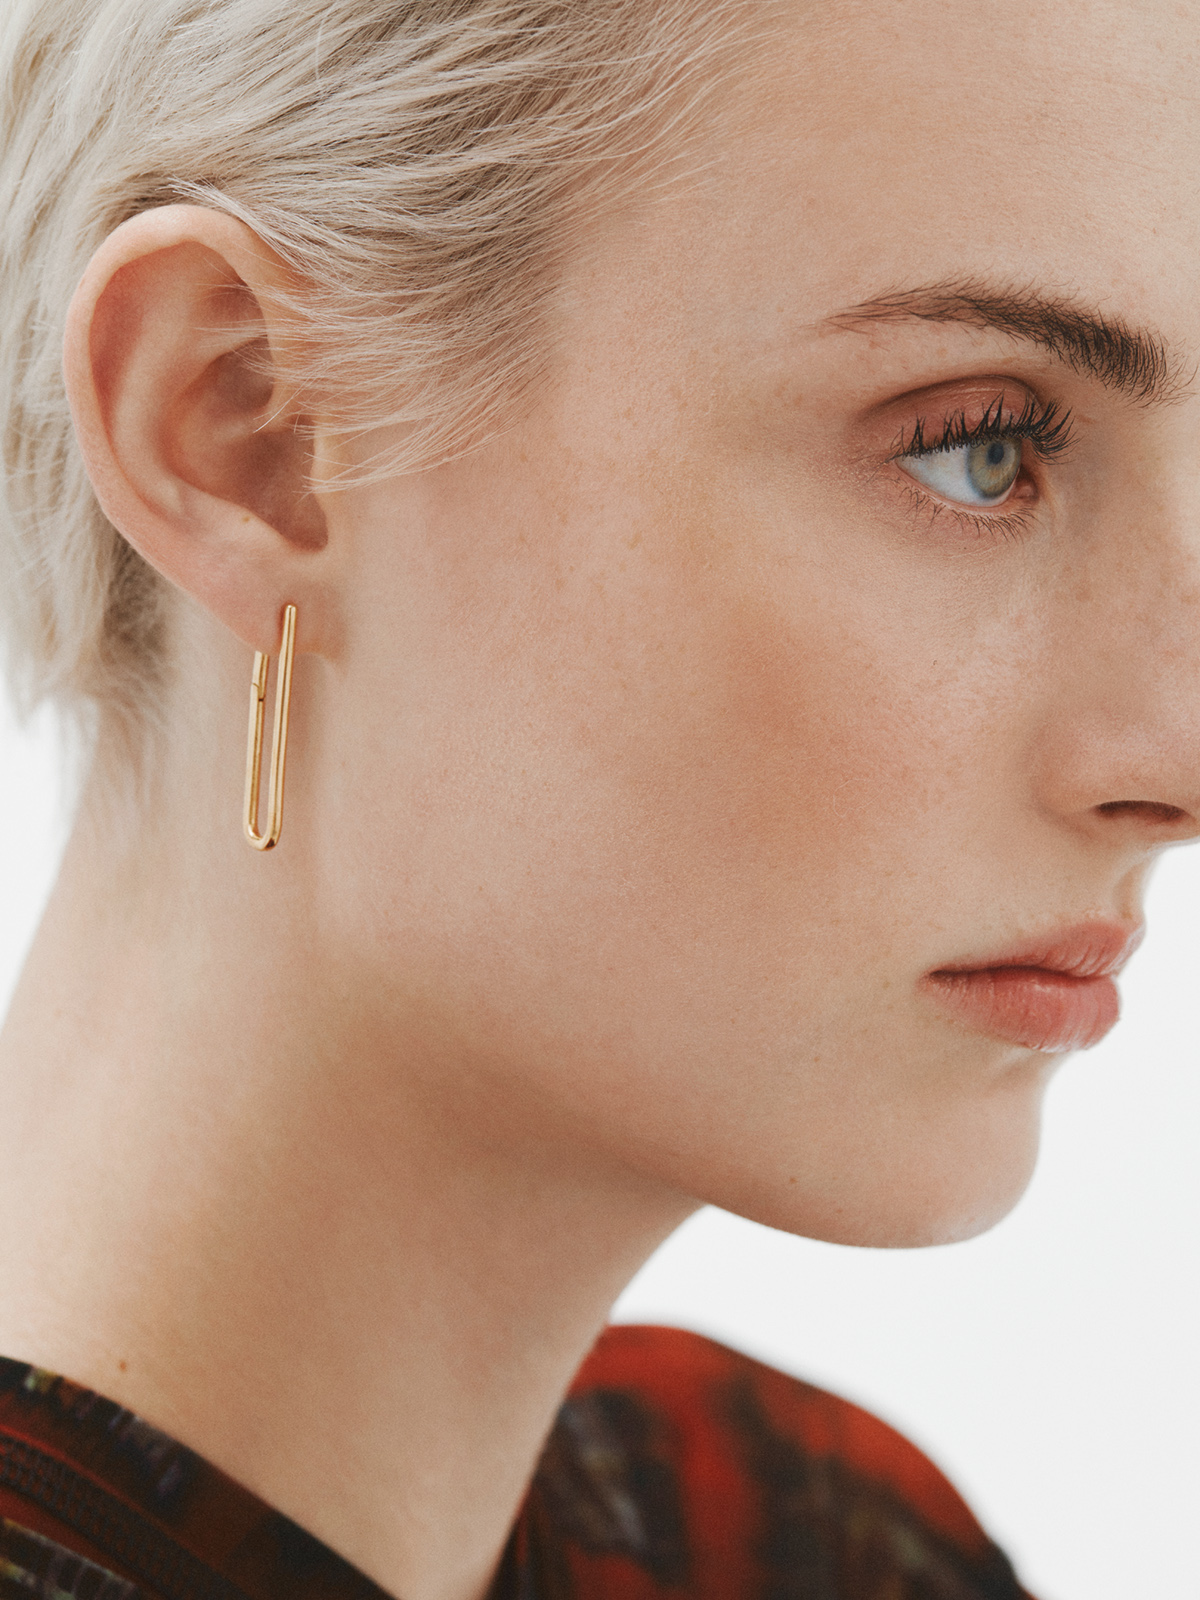 925 extra -bathed extra yellow gold ring earrings in 18k yellow